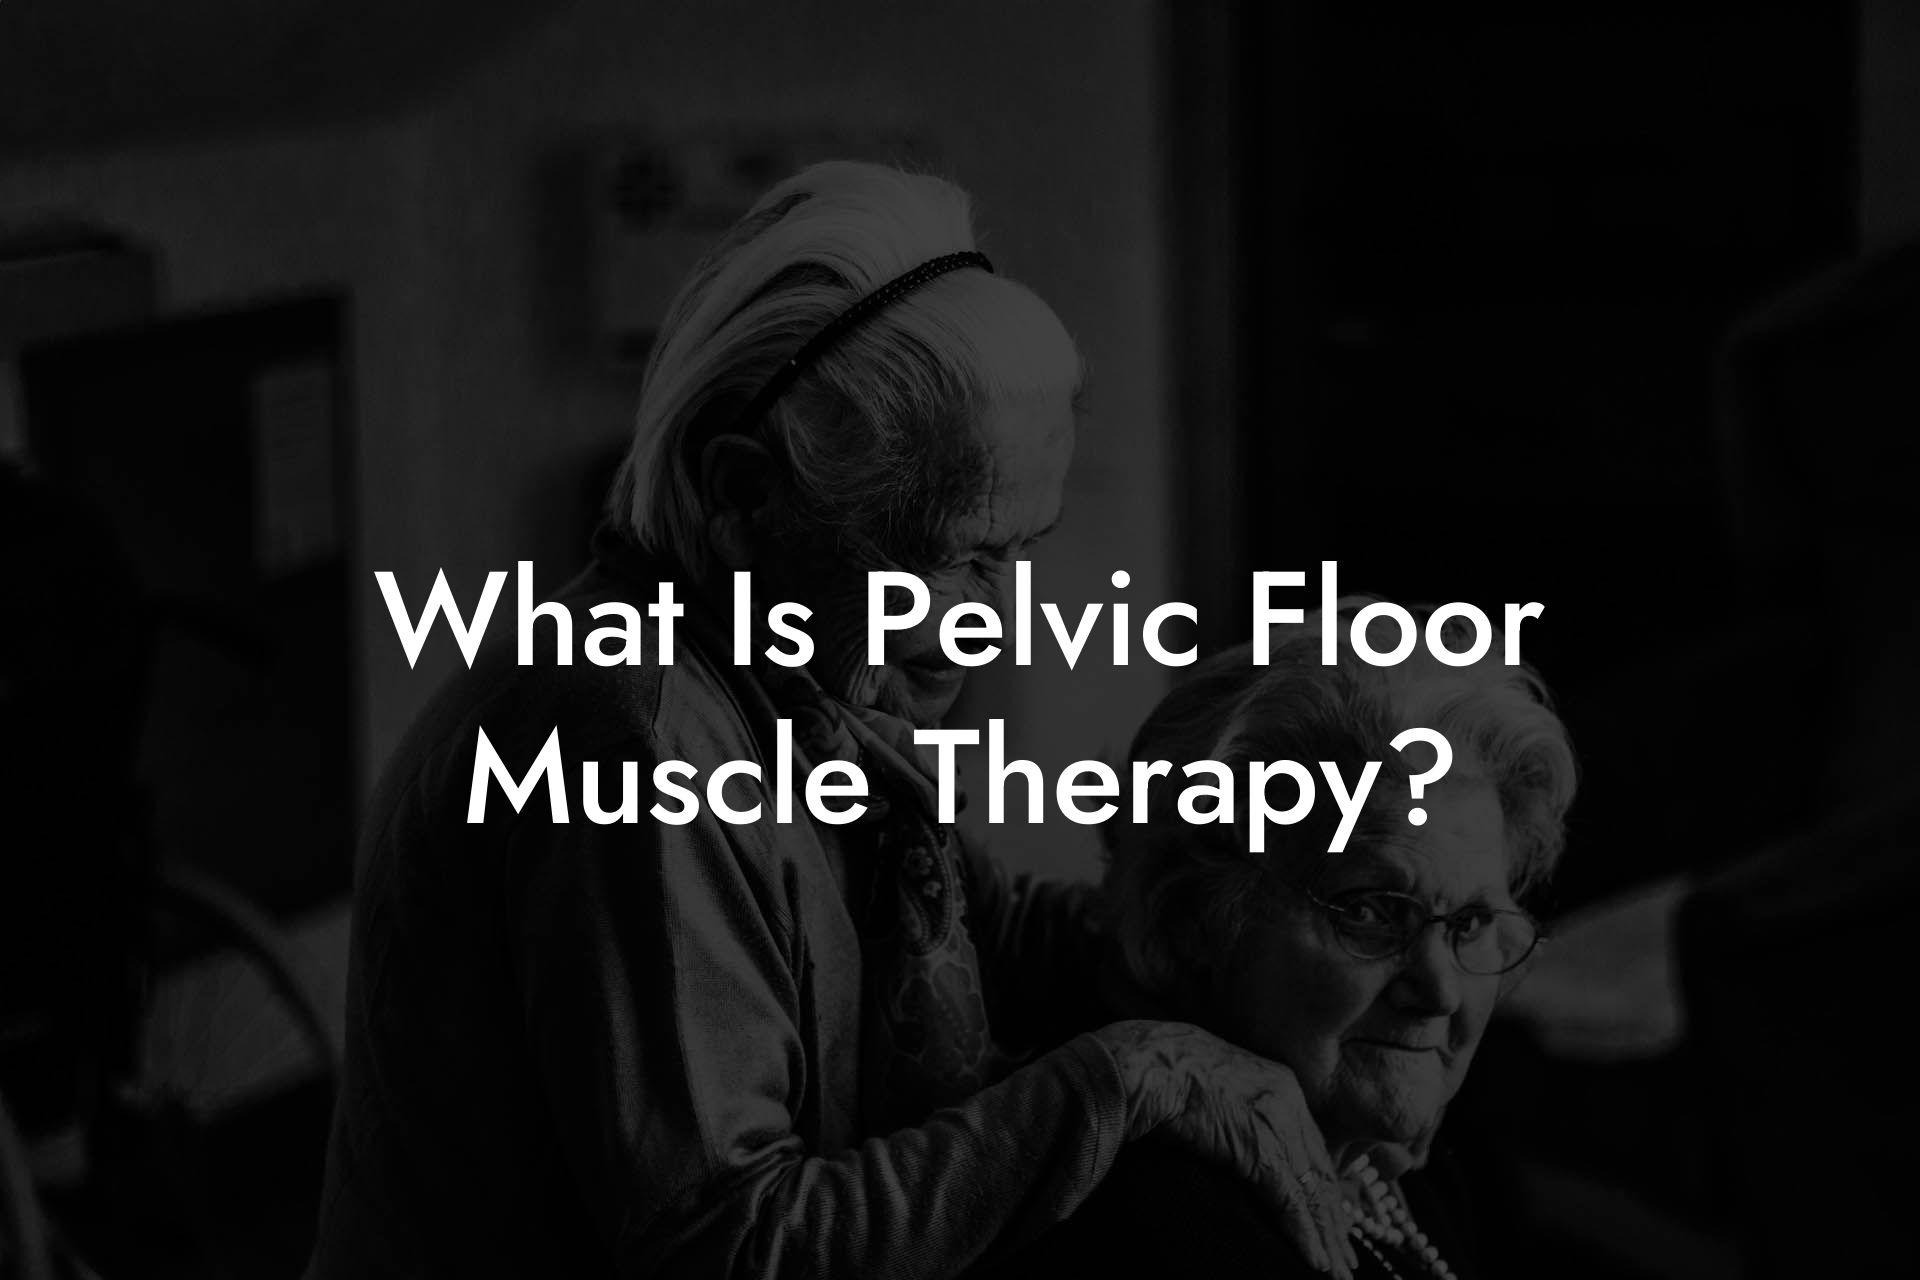 What Is Pelvic Floor Muscle Therapy?